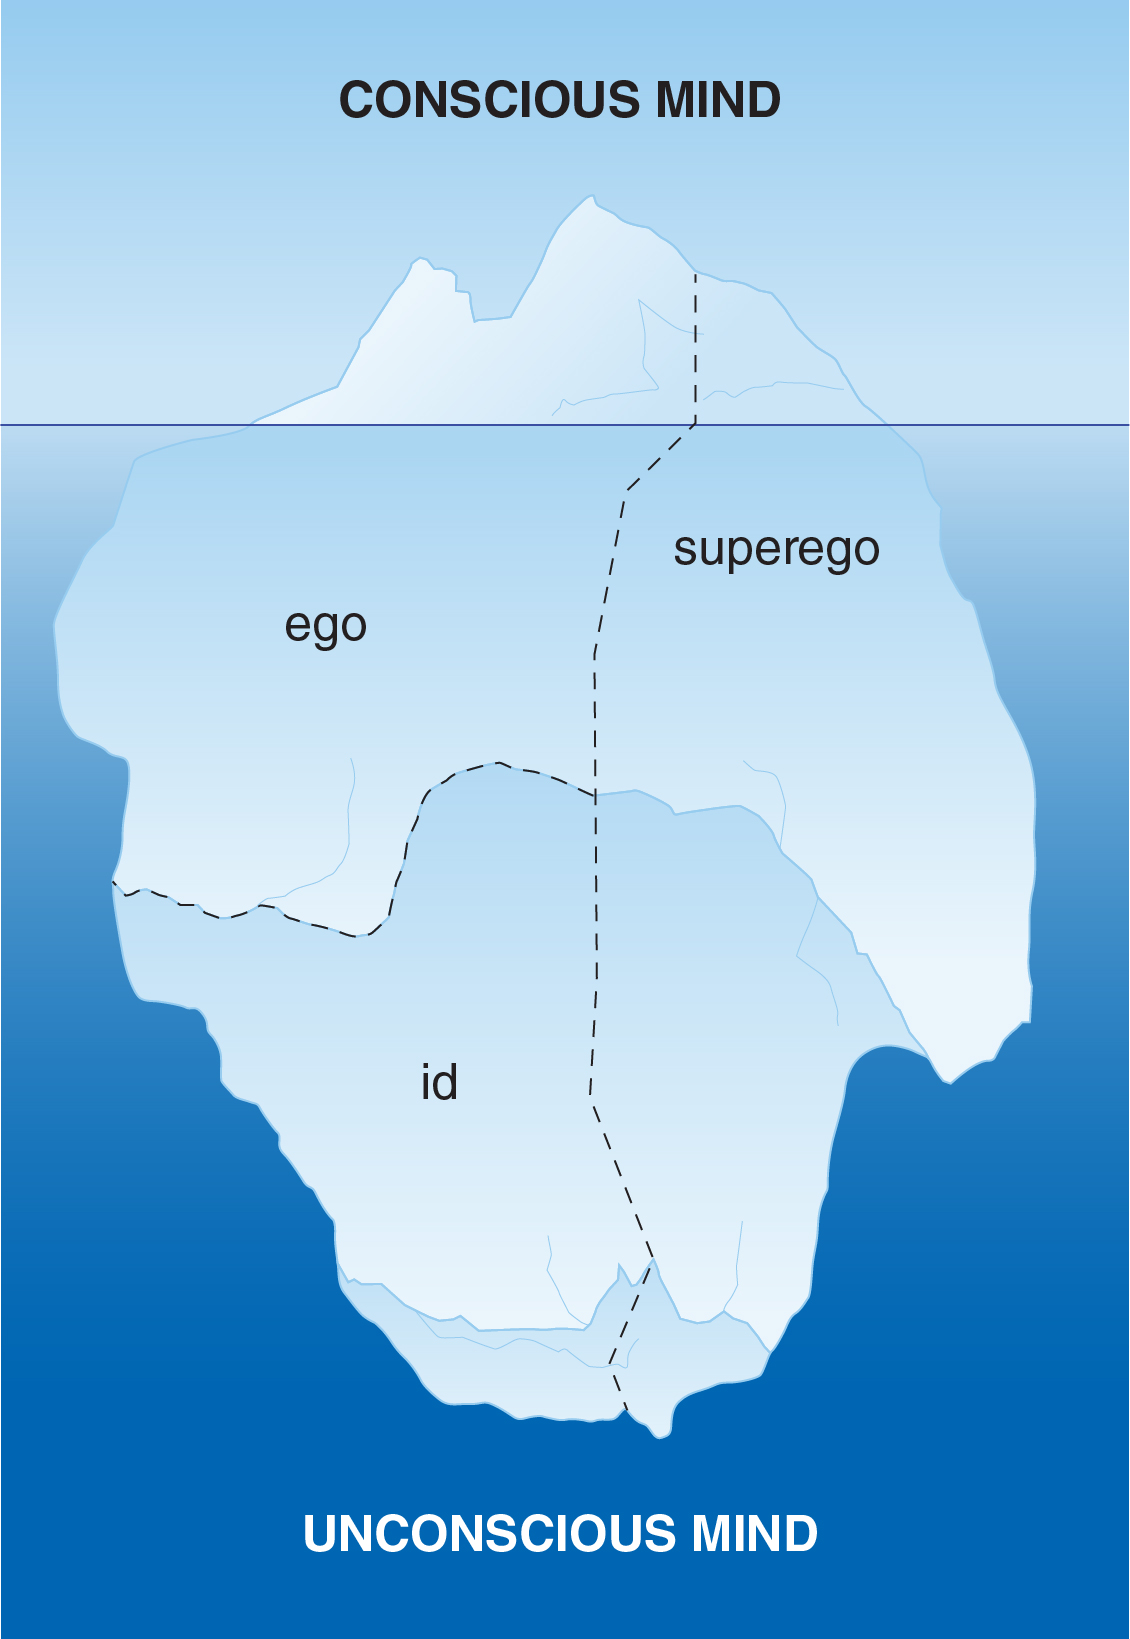 An iceberg floats in water.  The small portion above the water line is labeled the 